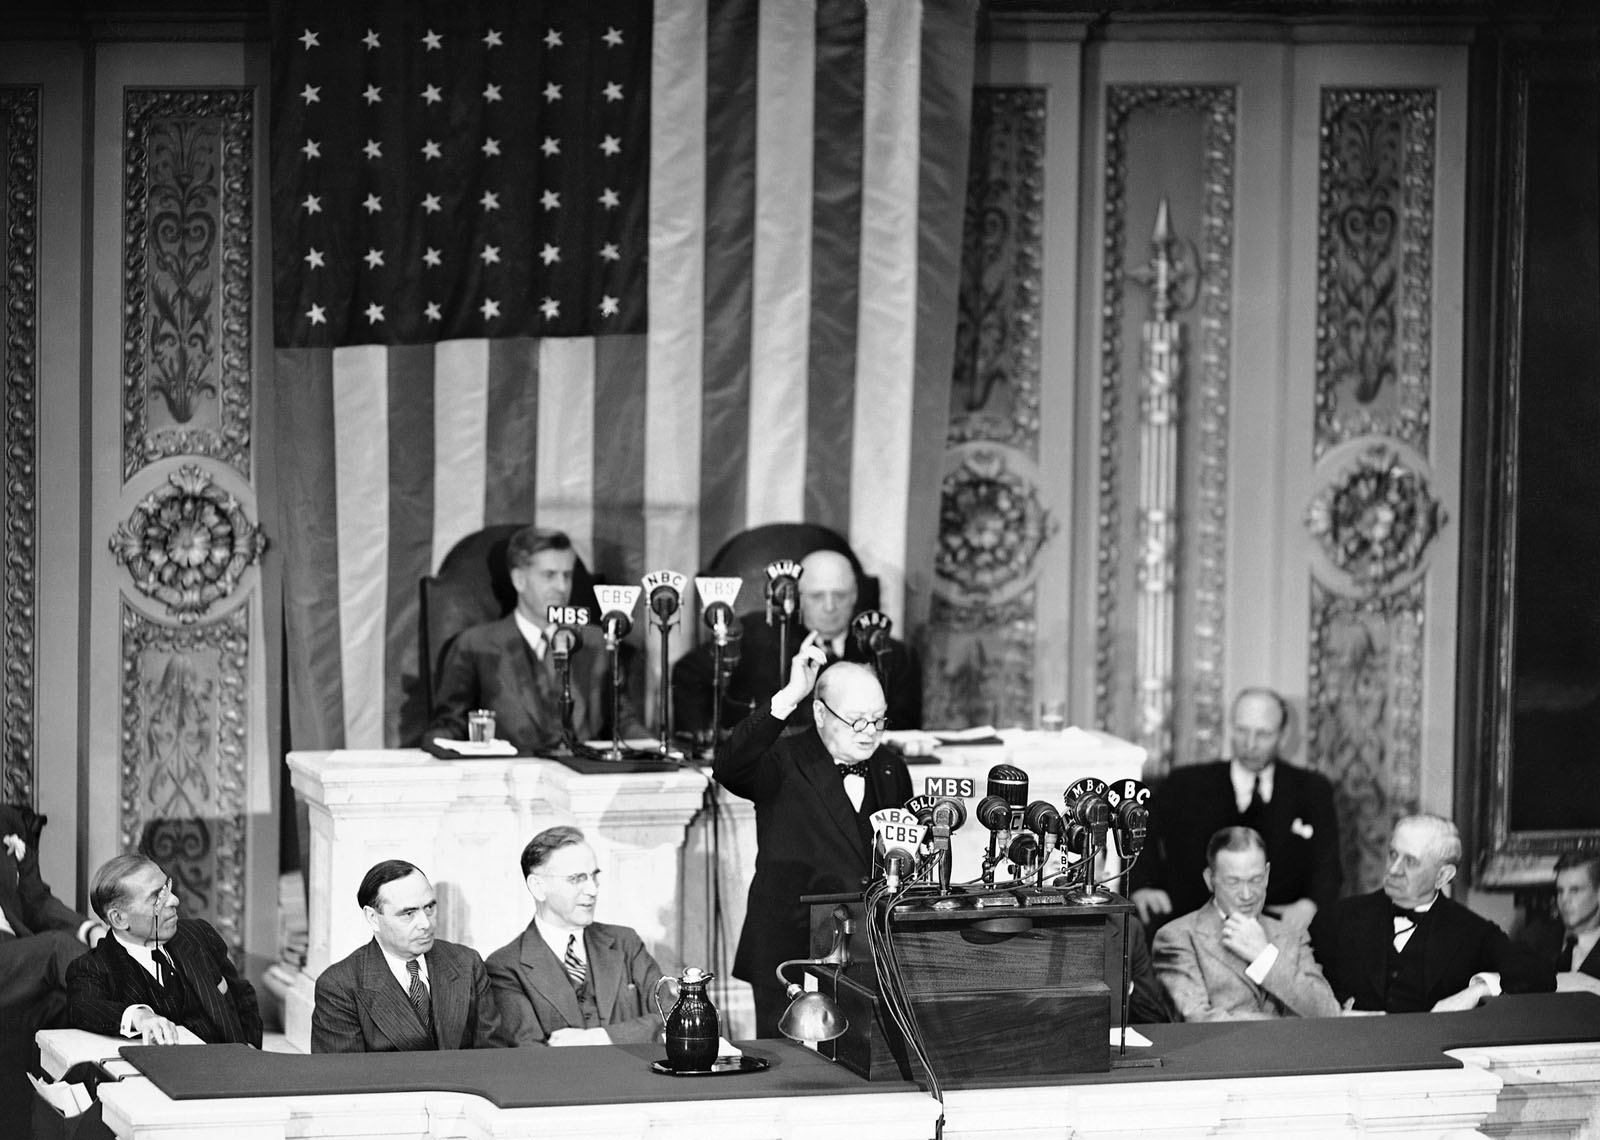 Prime Minister Winston Churchill in the House of Representatives in Washington on May 19, 1943. Churchill pledged Congress that Britain would stick with the U.S. in a campaign to pulverize Japan, asserted “we shall make out enemies in Europe and in Asia burn and consume their strength on land, on sea and in the air.” (AP Photo)